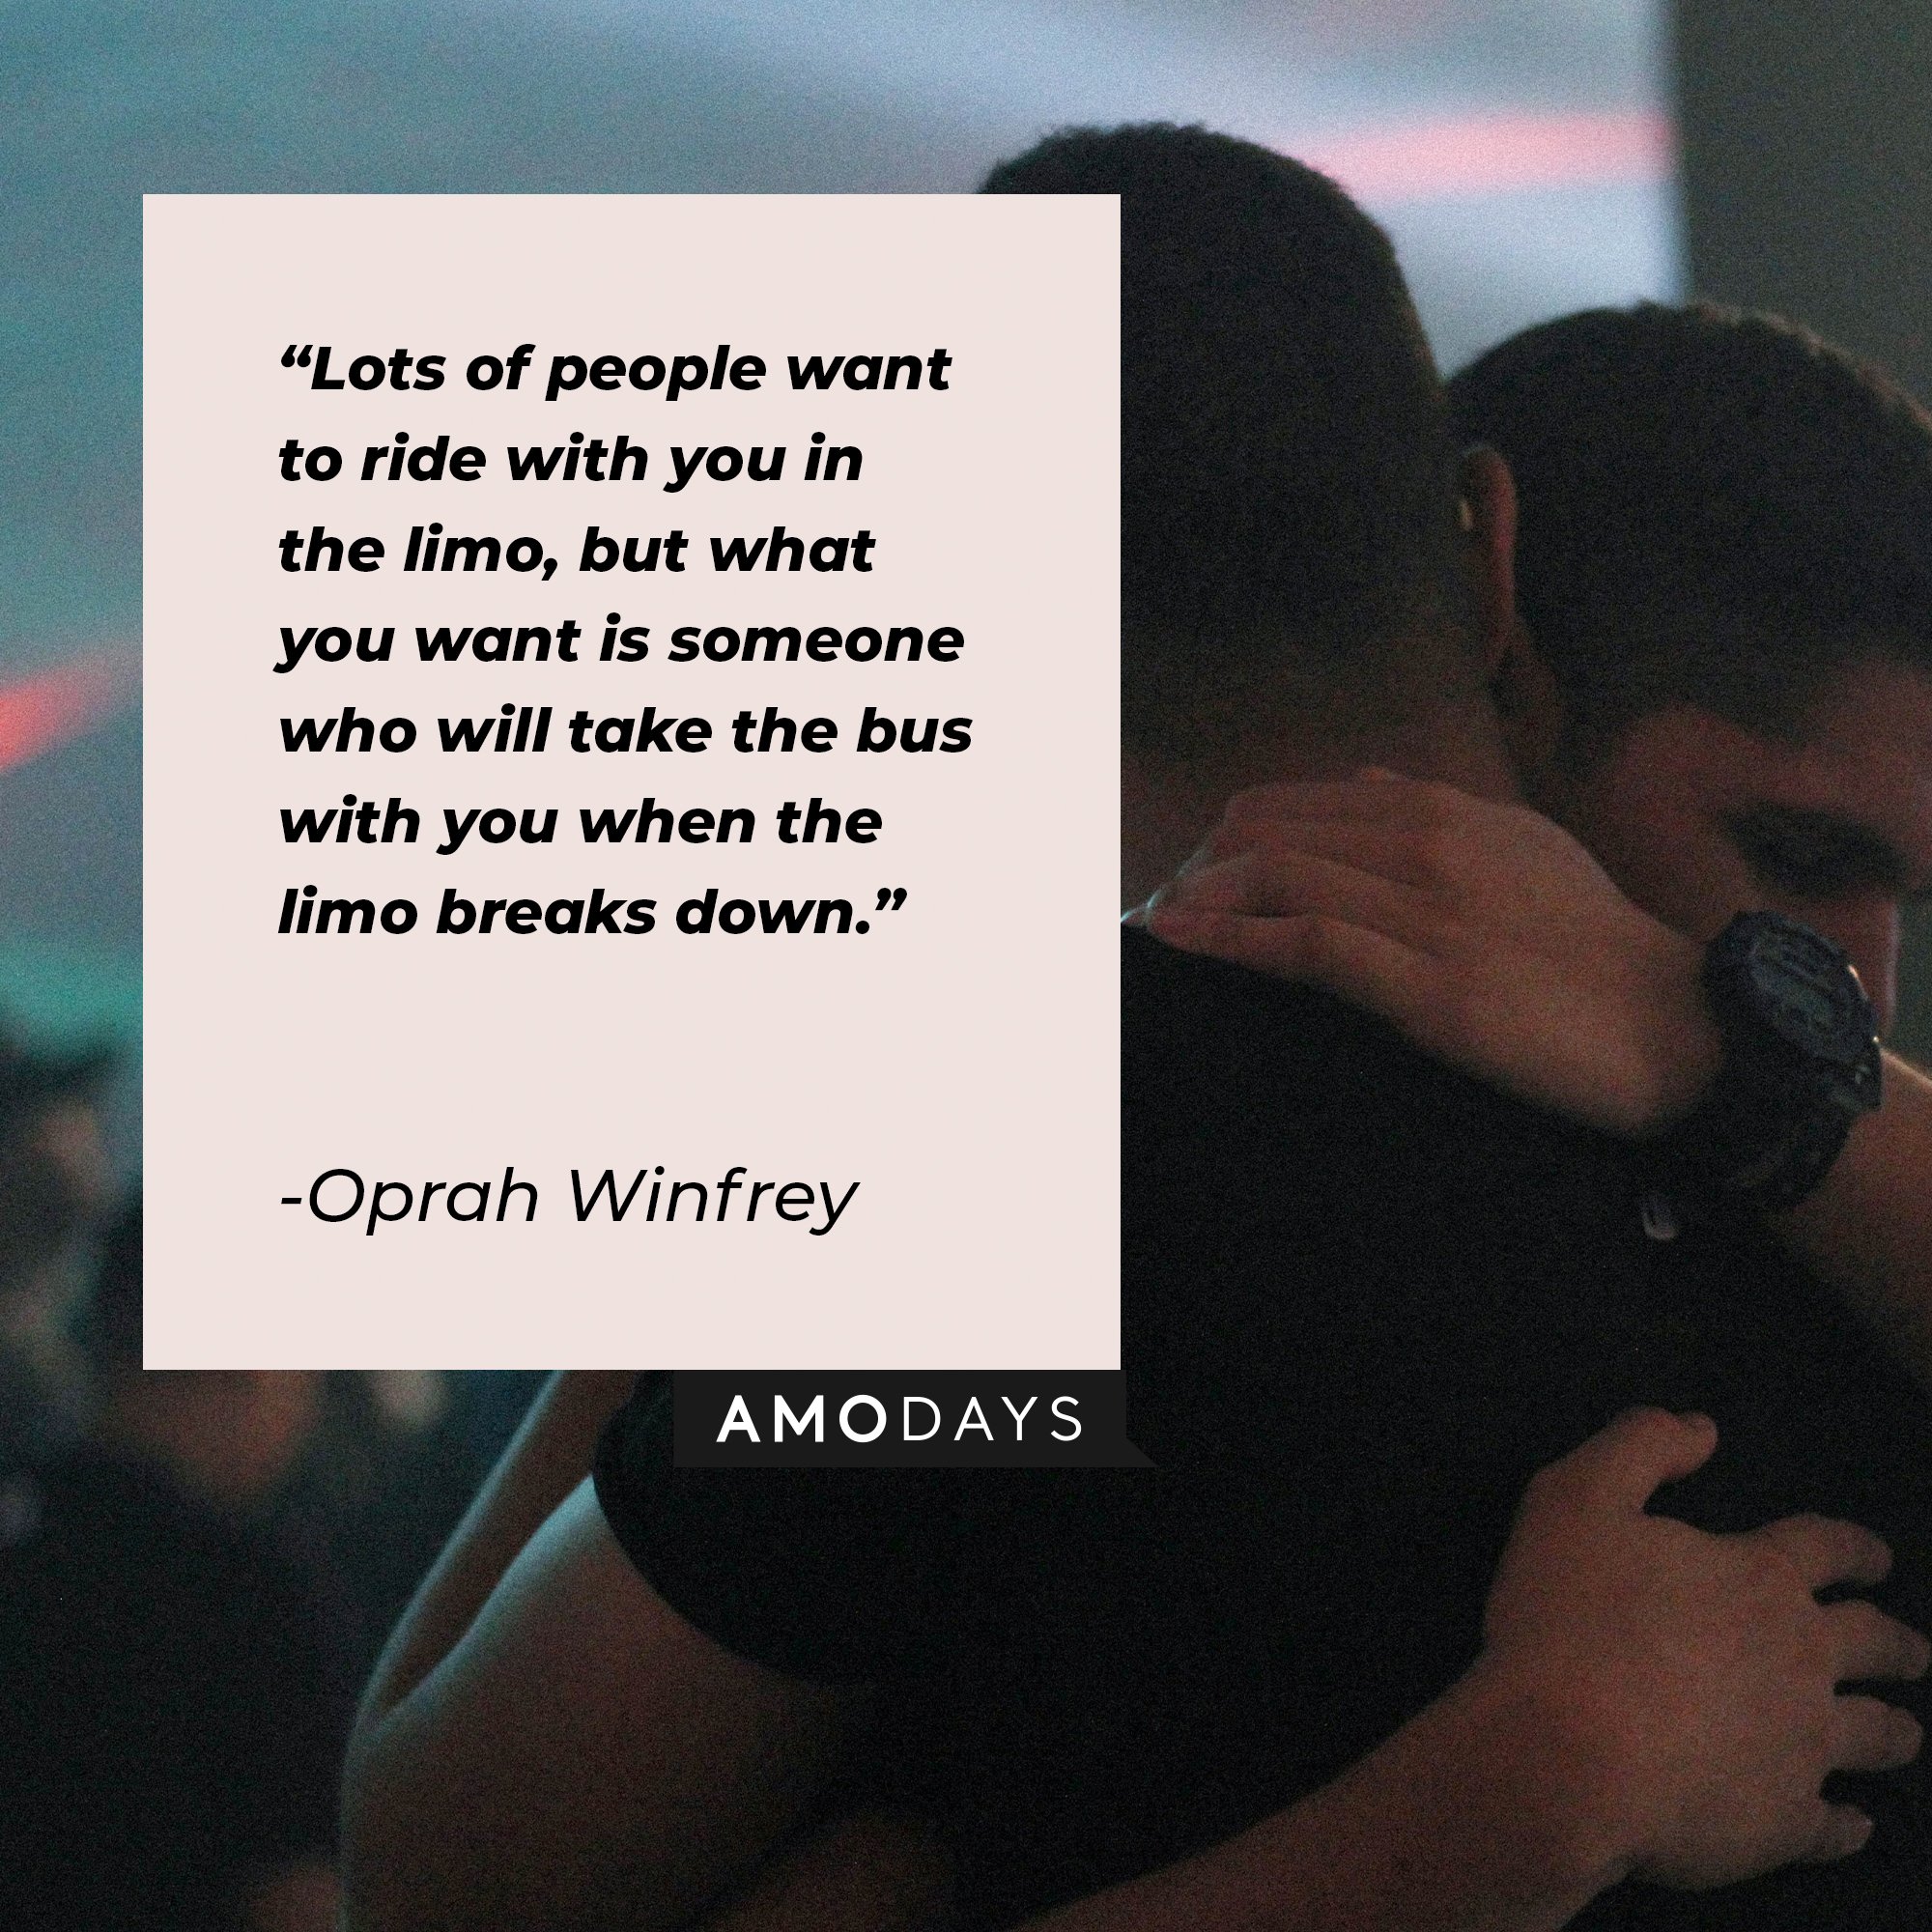 Oprah Winfrey’s quote: “Lots of people want to ride with you in the limo, but what you want is someone who will take the bus with you when the limo breaks down.” | Image: AmoDays